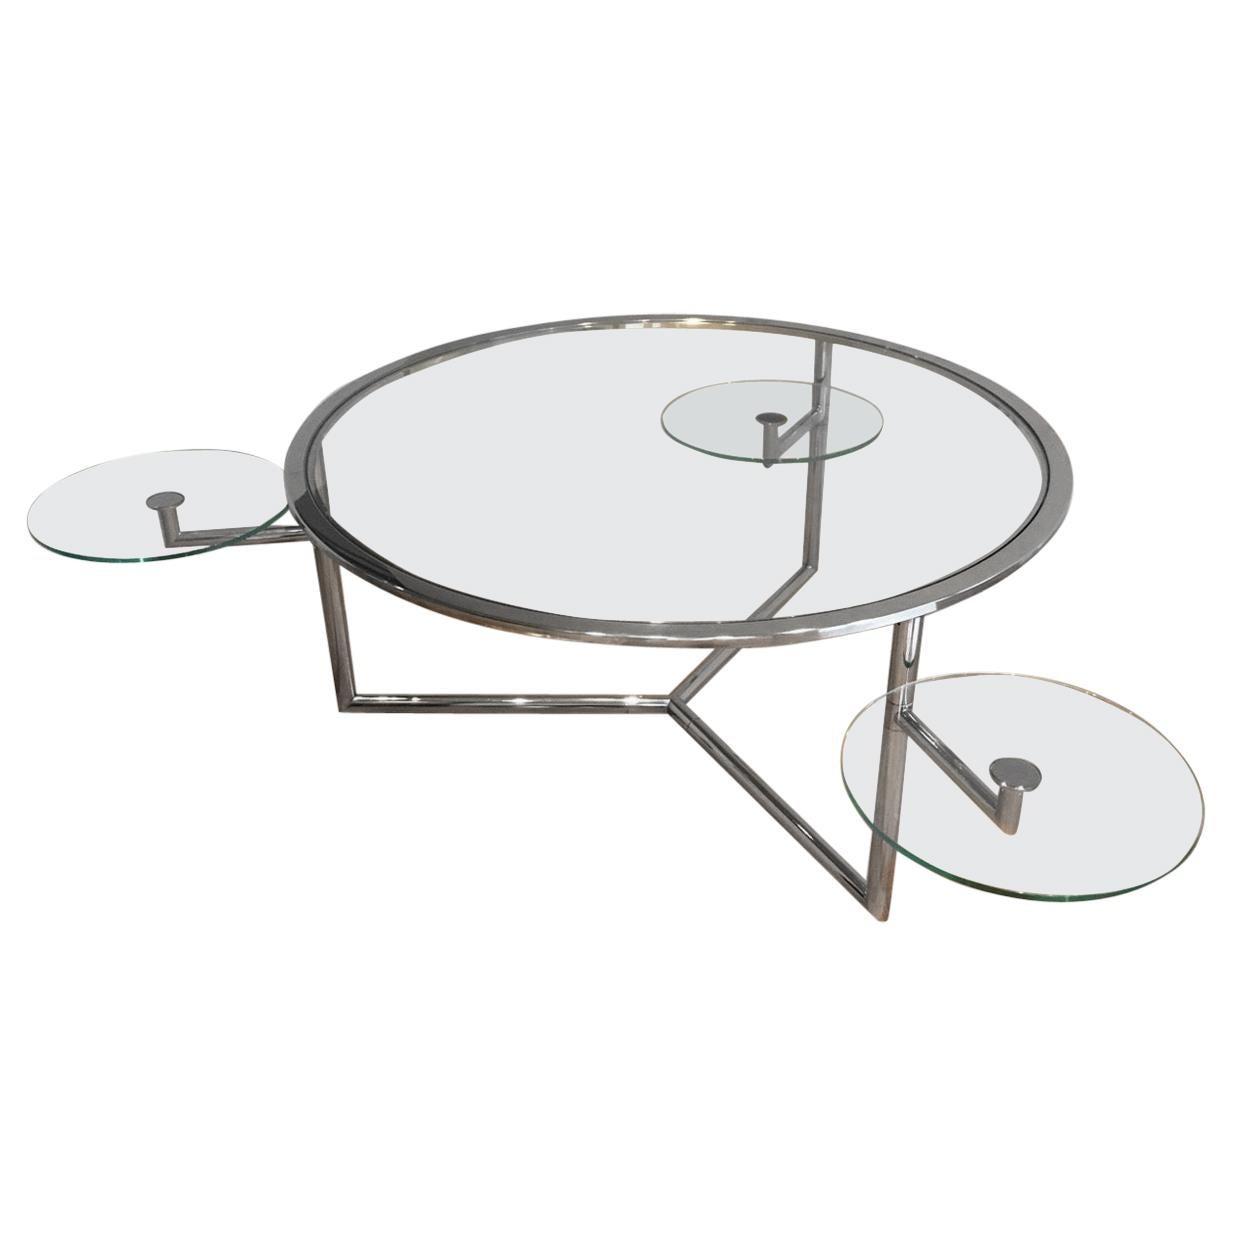 Beautiful Rare Round Chrome Coffee Table with Removable Round Glass Shelves